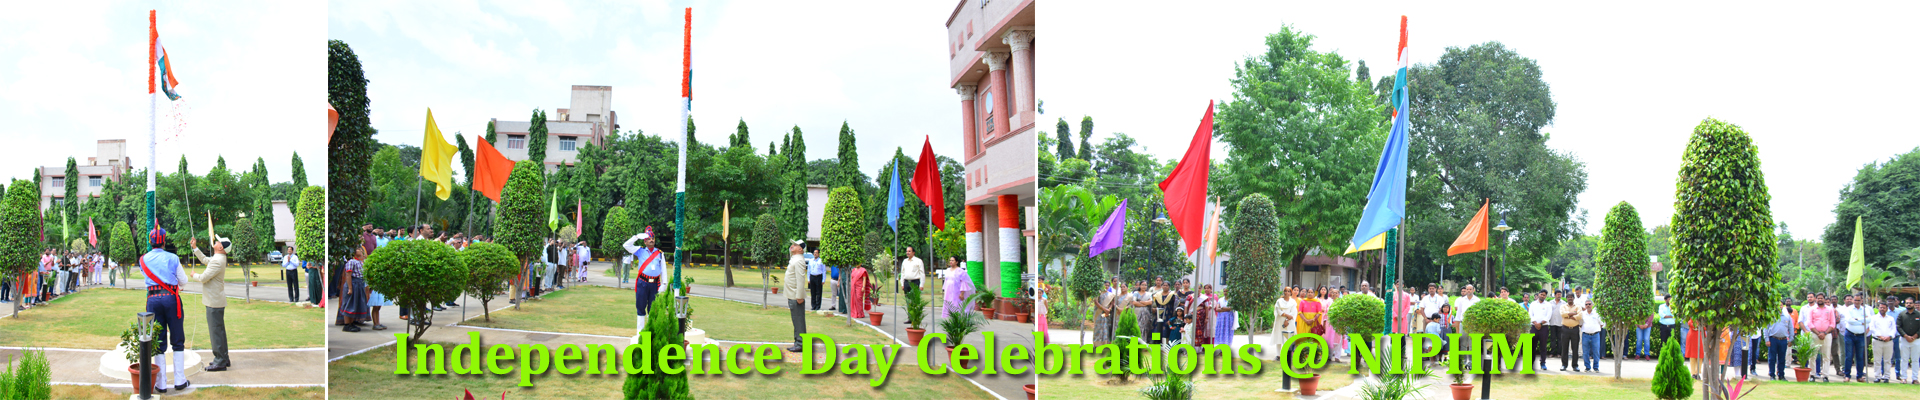 Independence Day Celebrations @ NIPHM